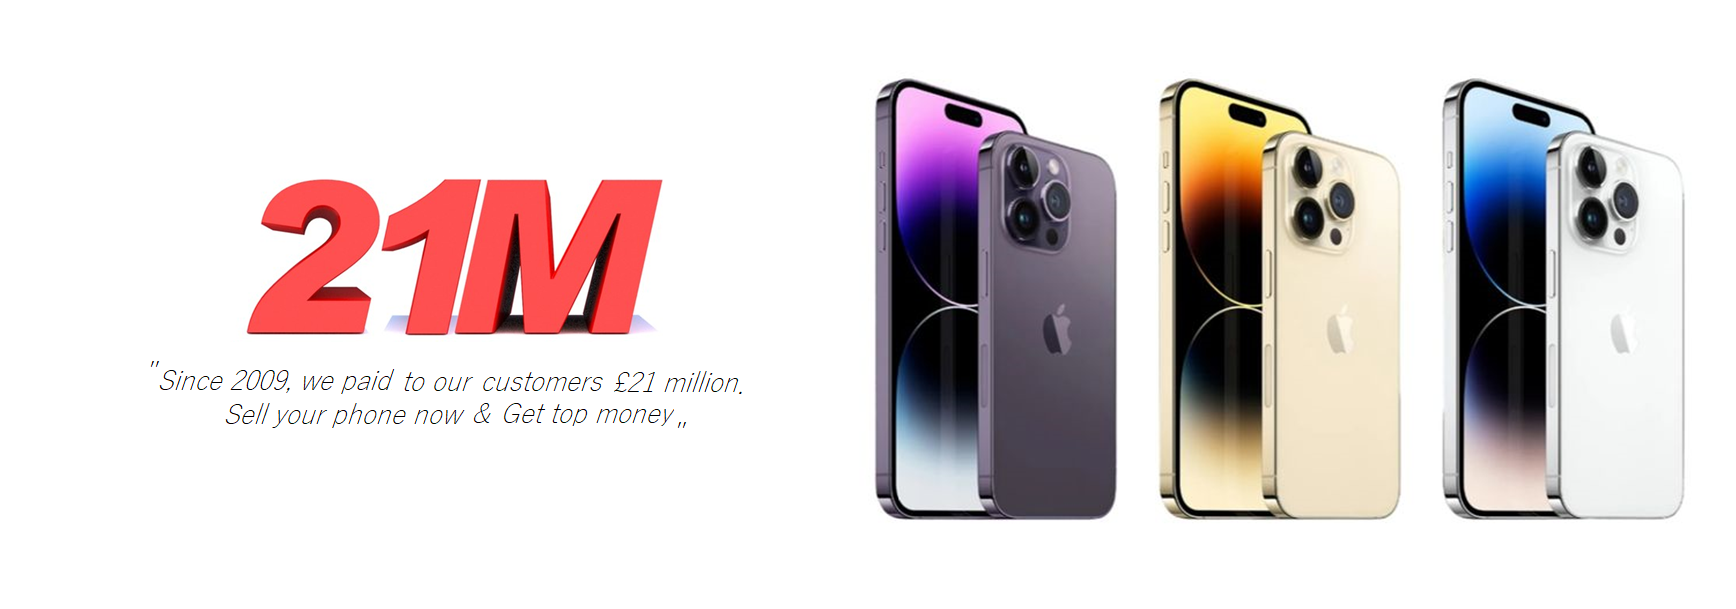 Since 2009, we paid £21 million to our customers. Sell yours phone now!